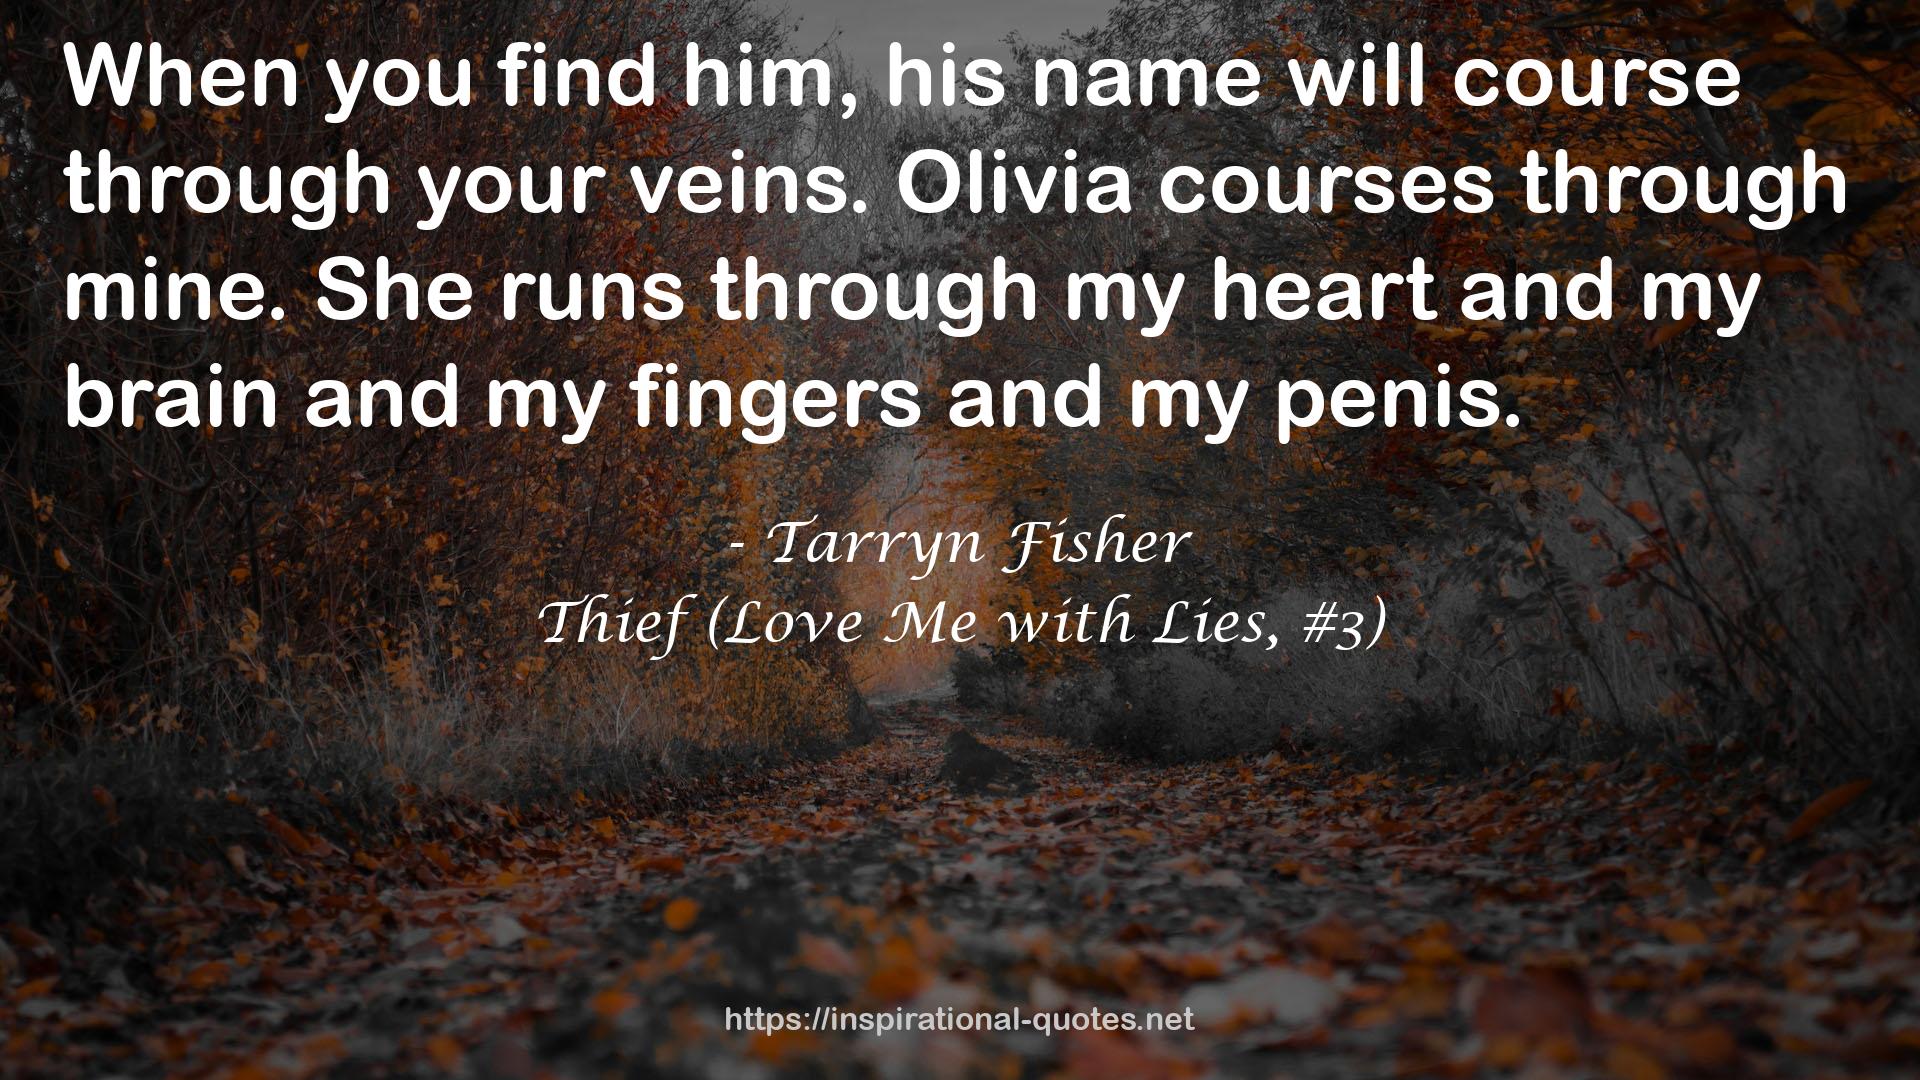 Tarryn Fisher QUOTES